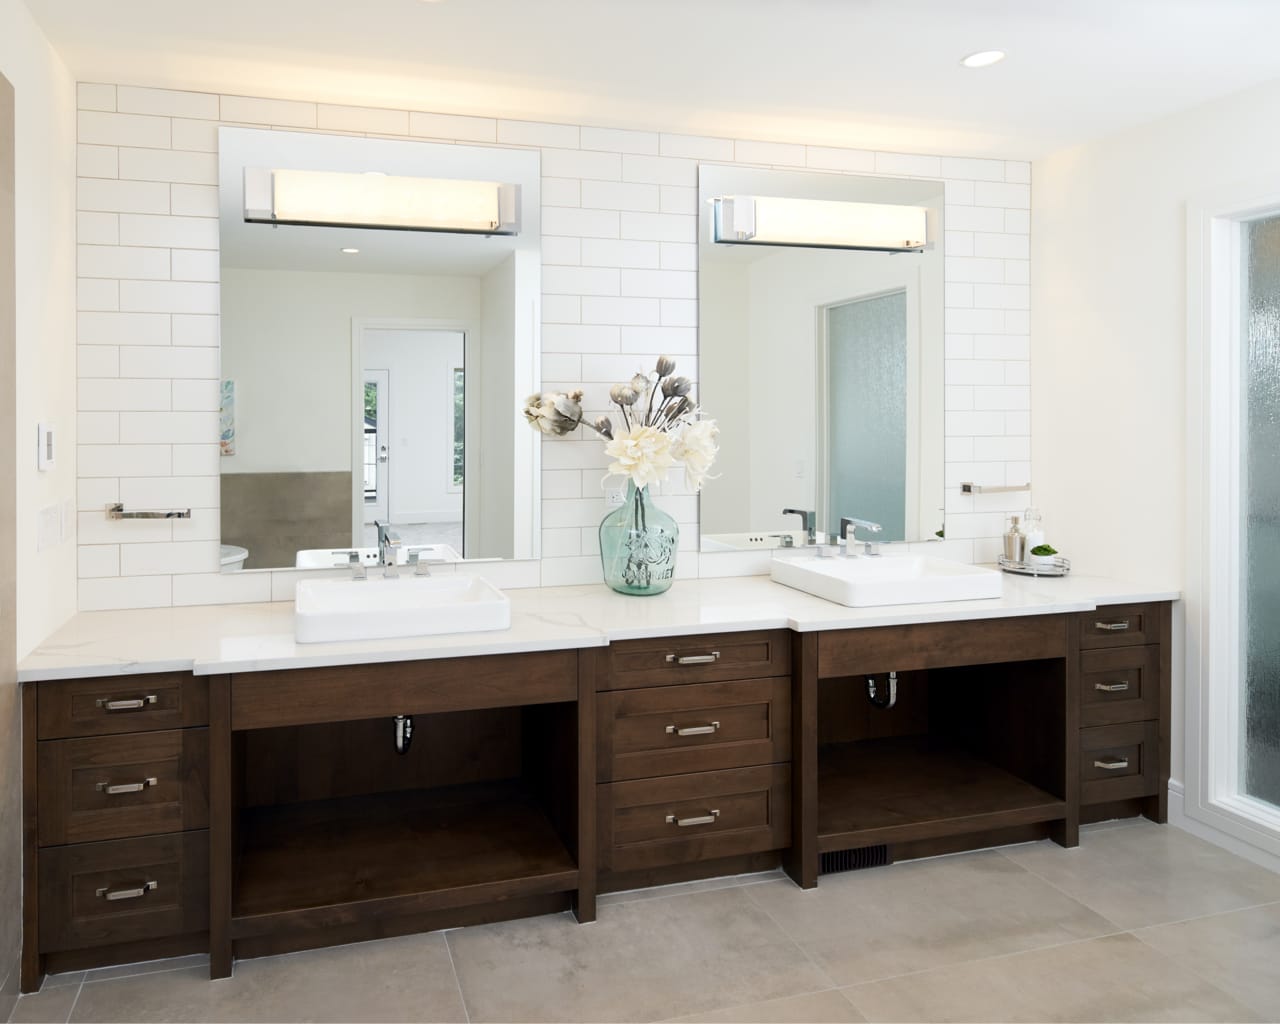 A transitional style bathroom with a large double bathroom vanity with walnut shaker-style cabinets.